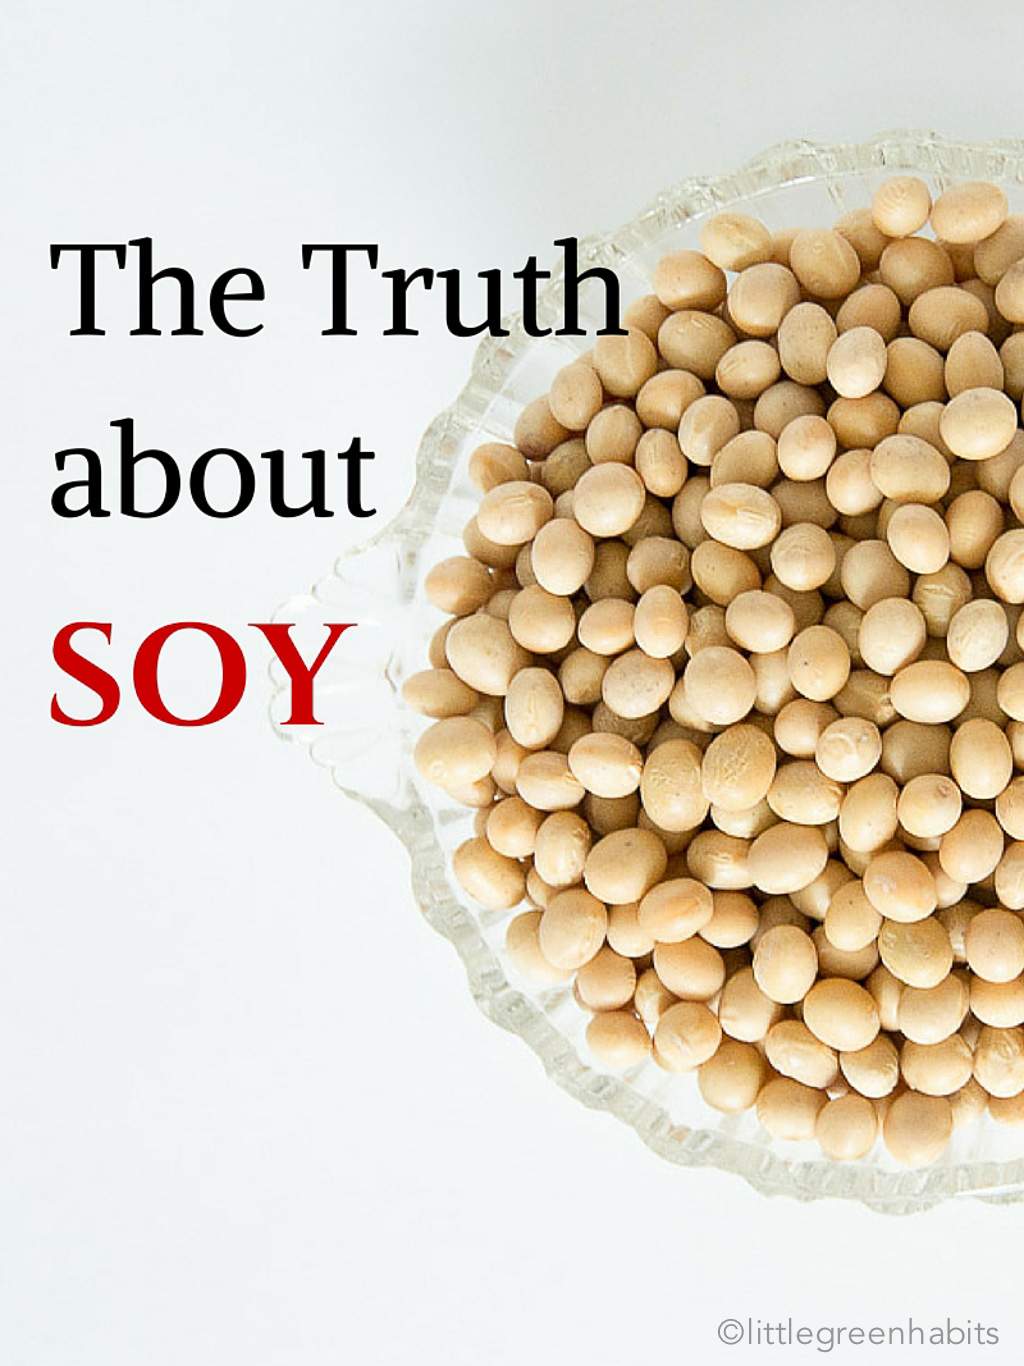 The Truth about Soy